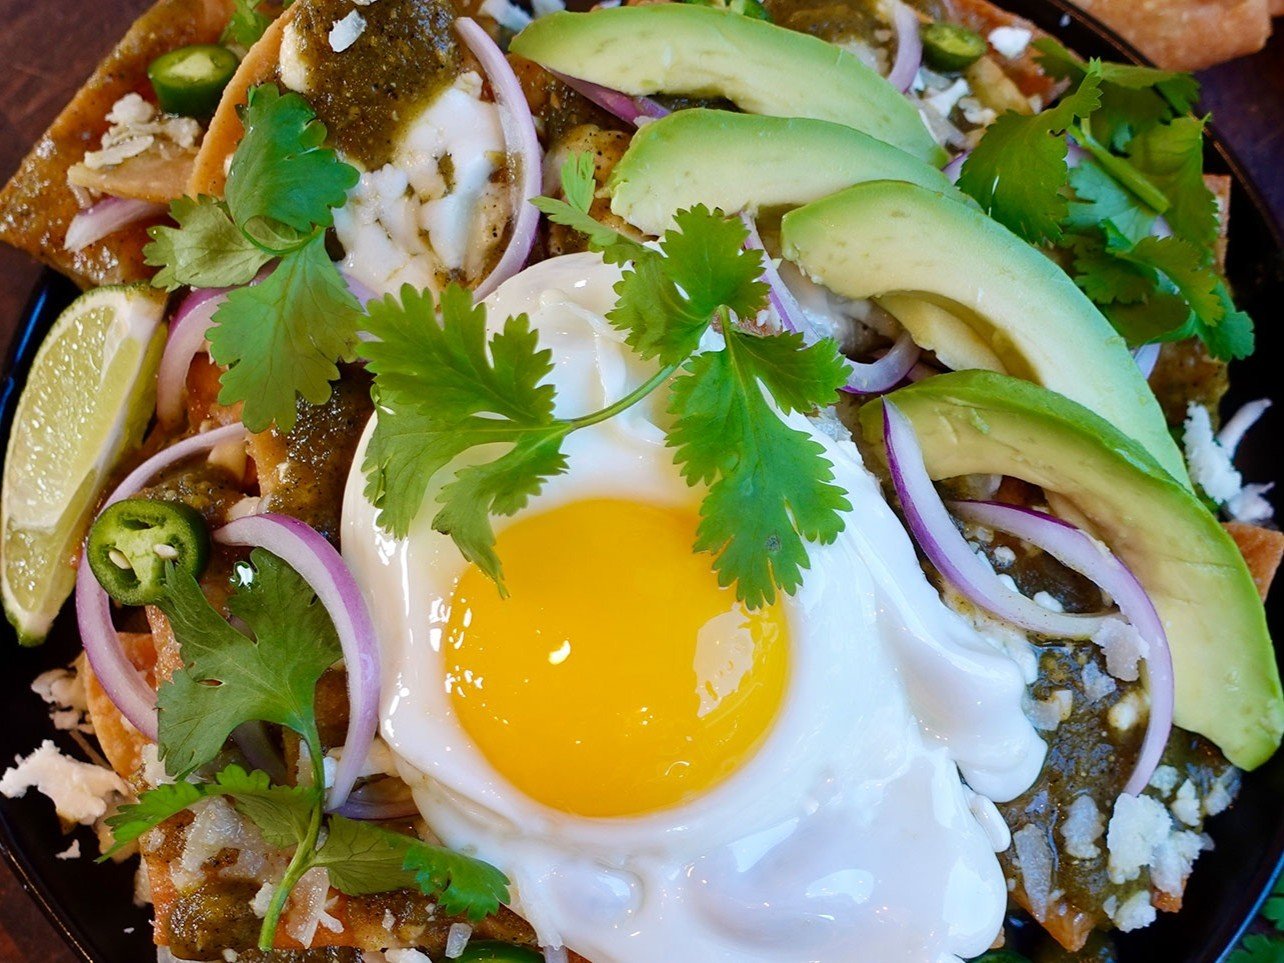 Tangy salsa verde, creamy avocado, crispy tortilla chips, and protein-packed eggs &ndash; can you think of a better way to celebrate Cinco de Mayo than with this Chilaquiles Verdes Con Huevos recipe from @incredibleegg!? 🥑

Head to the link in our b